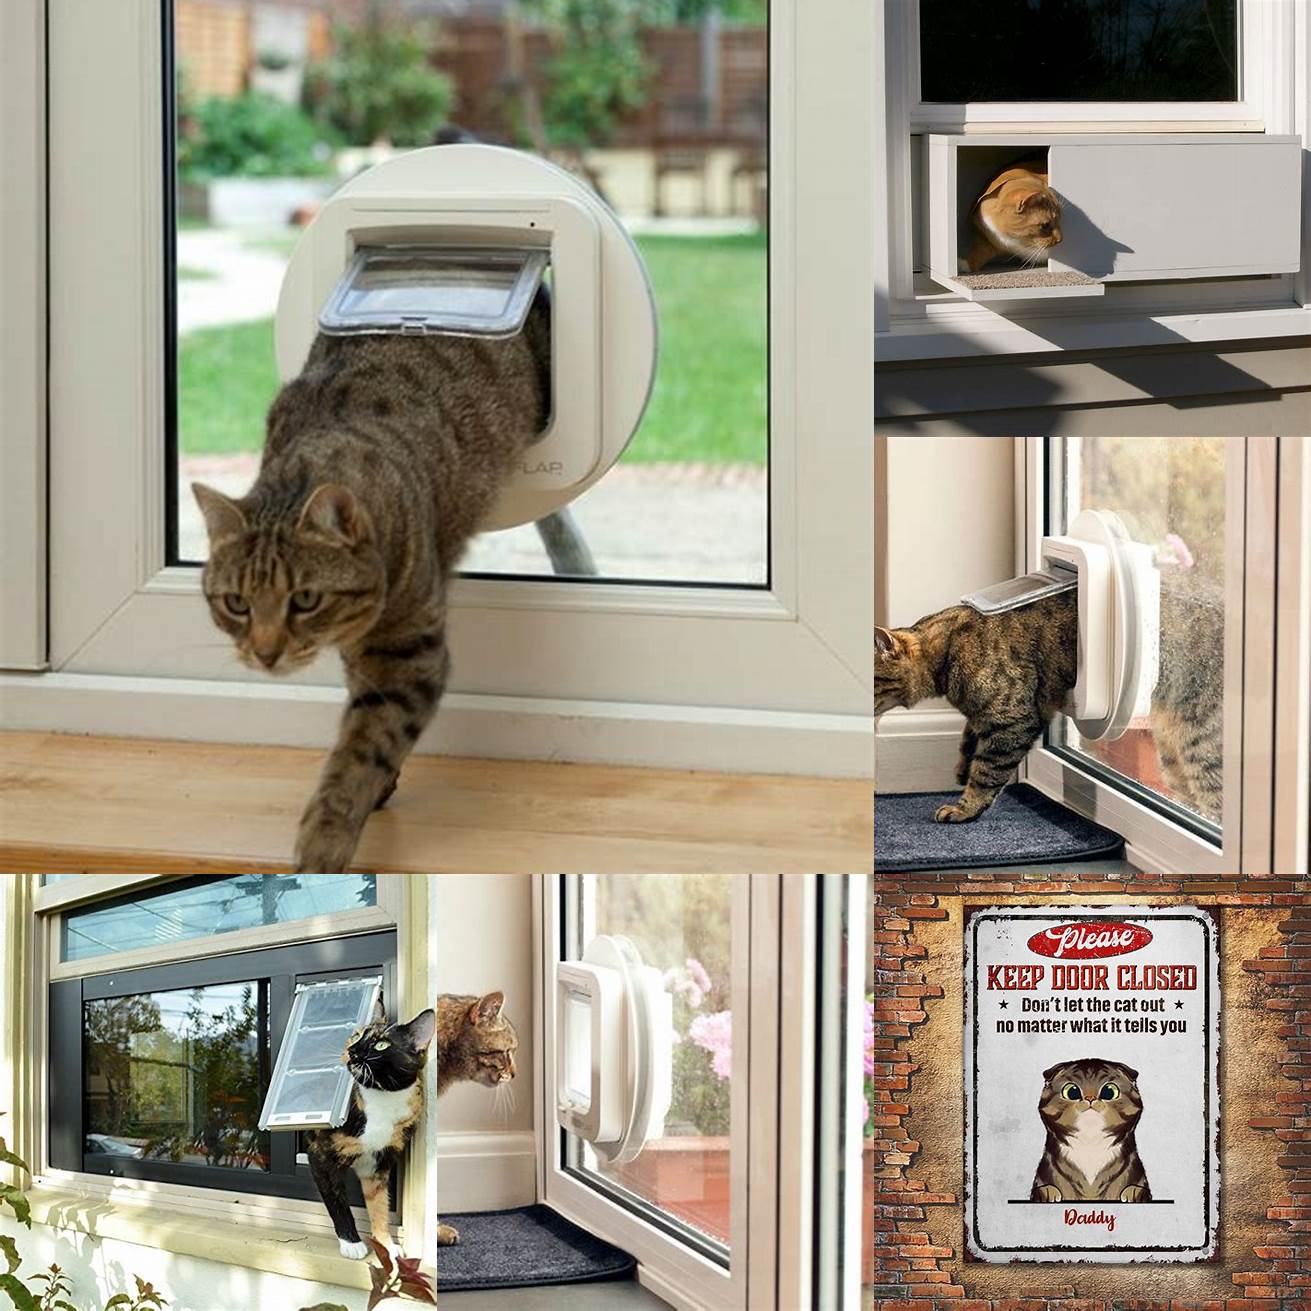 Close all windows and doors and make sure your cat cannot escape